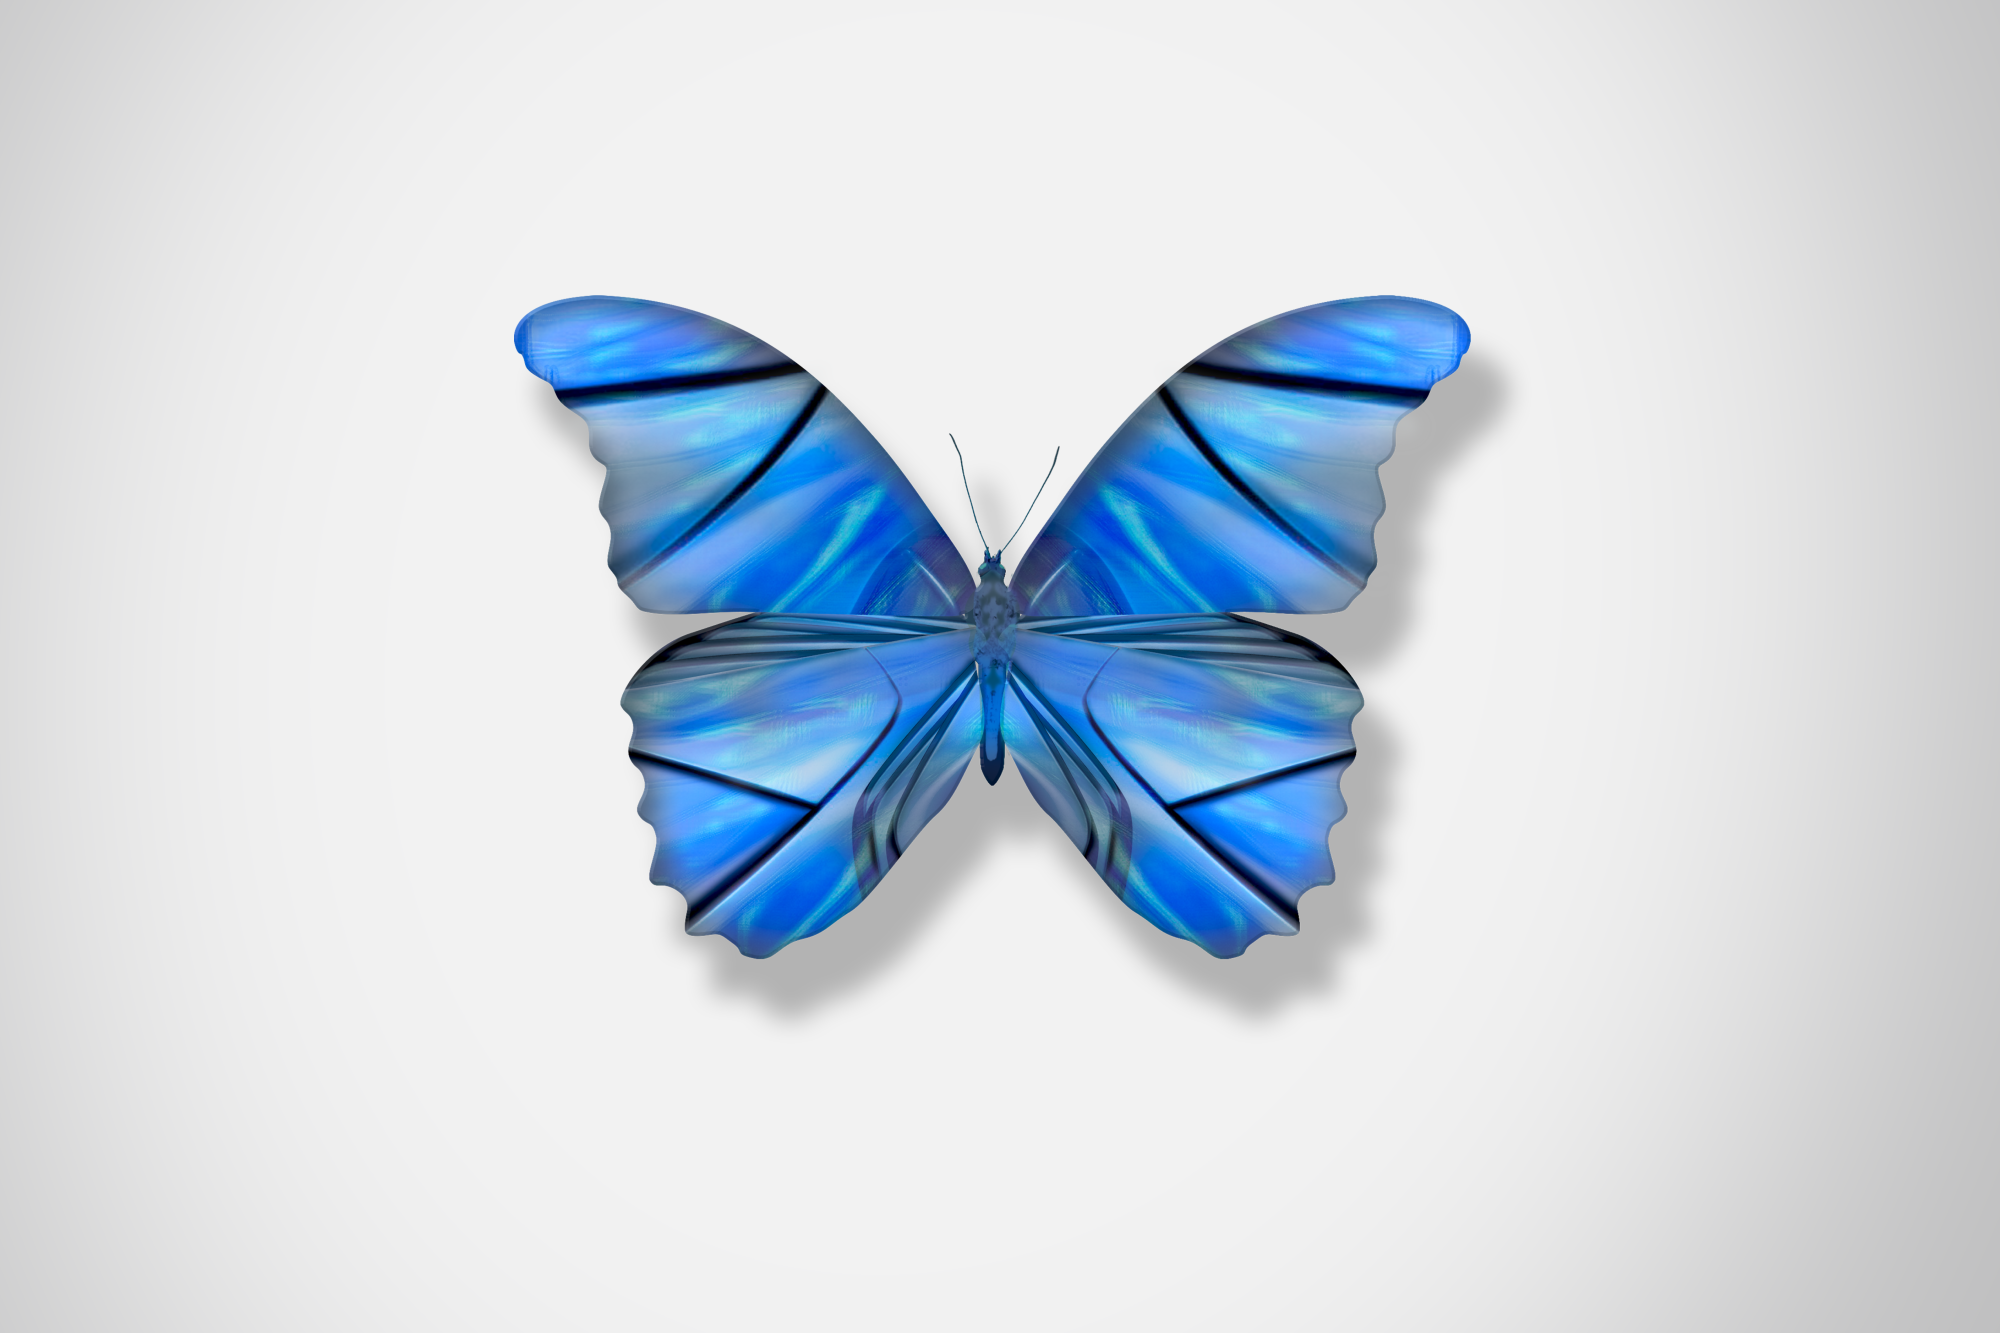 Ford_Butterflies_Concept_The_Beauty_Of_Change_DKLG_Design_008.png